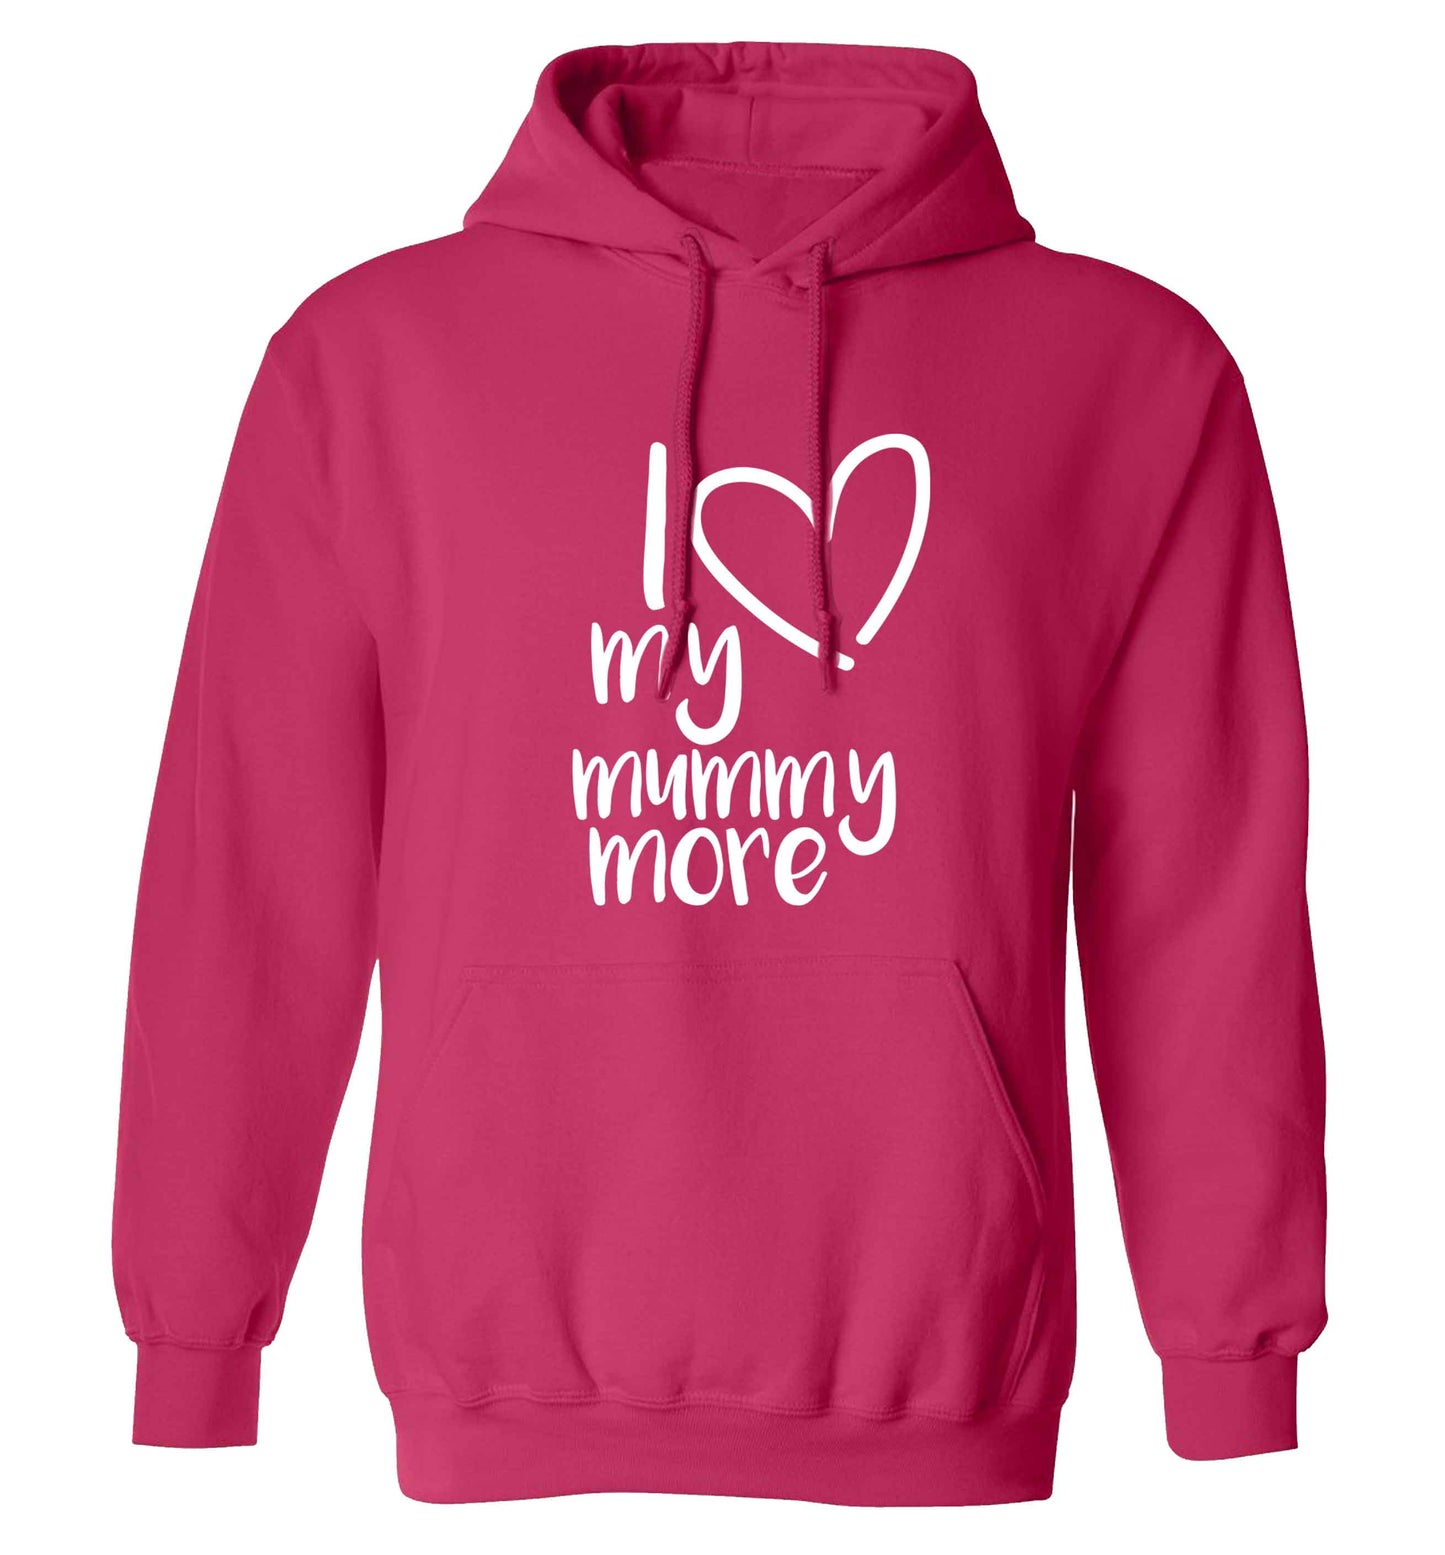 I love my mummy more adults unisex pink hoodie 2XL